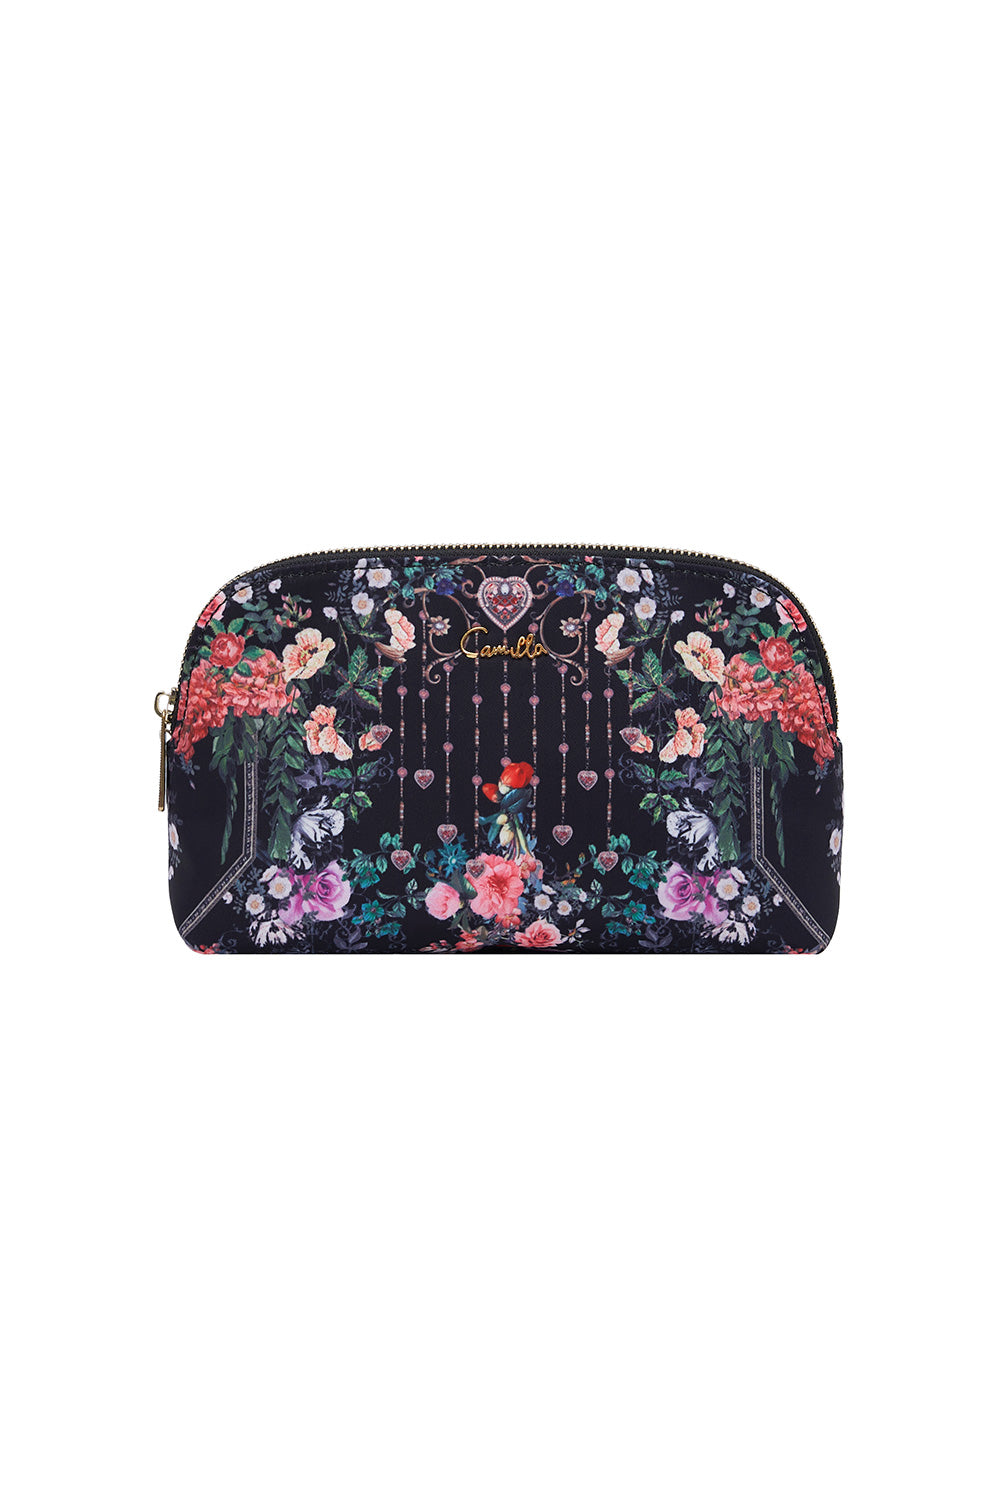 SMALL COSMETIC CASE MONTAGUES CAPULET